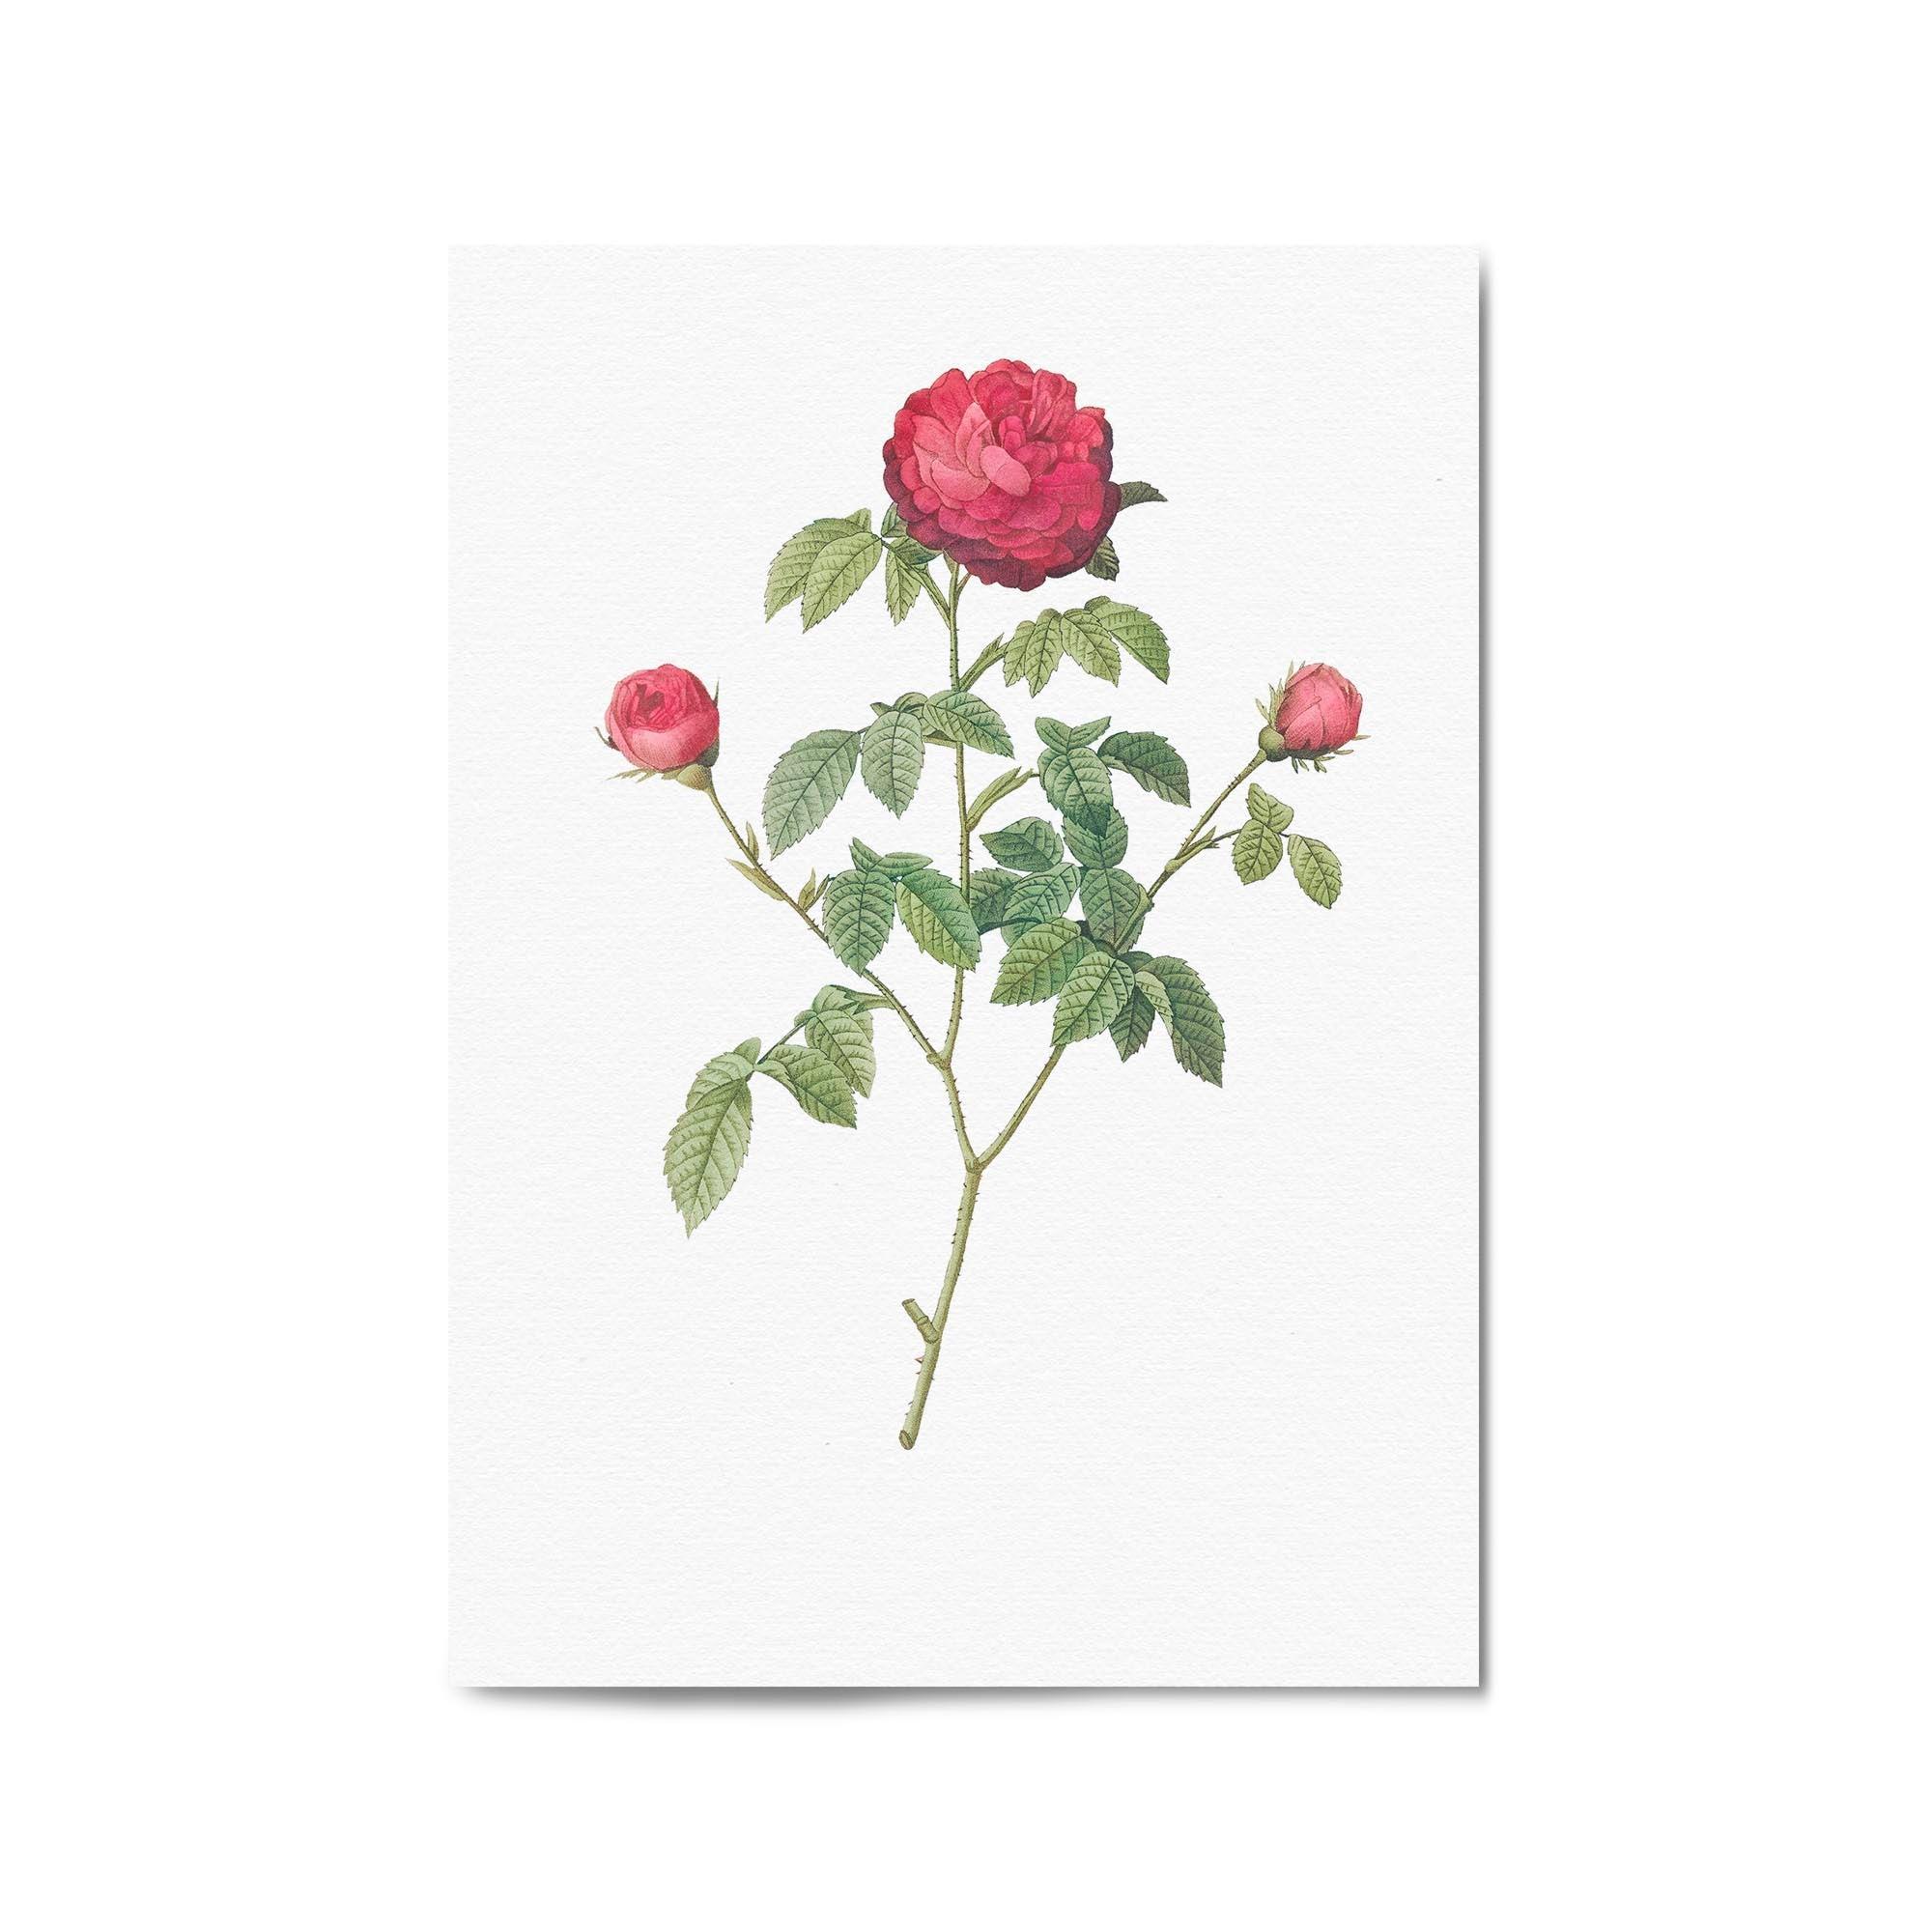 Flower Botanical Painting Kitchen Hallway Wall Art #3: Poster Print, Canvas or Framed